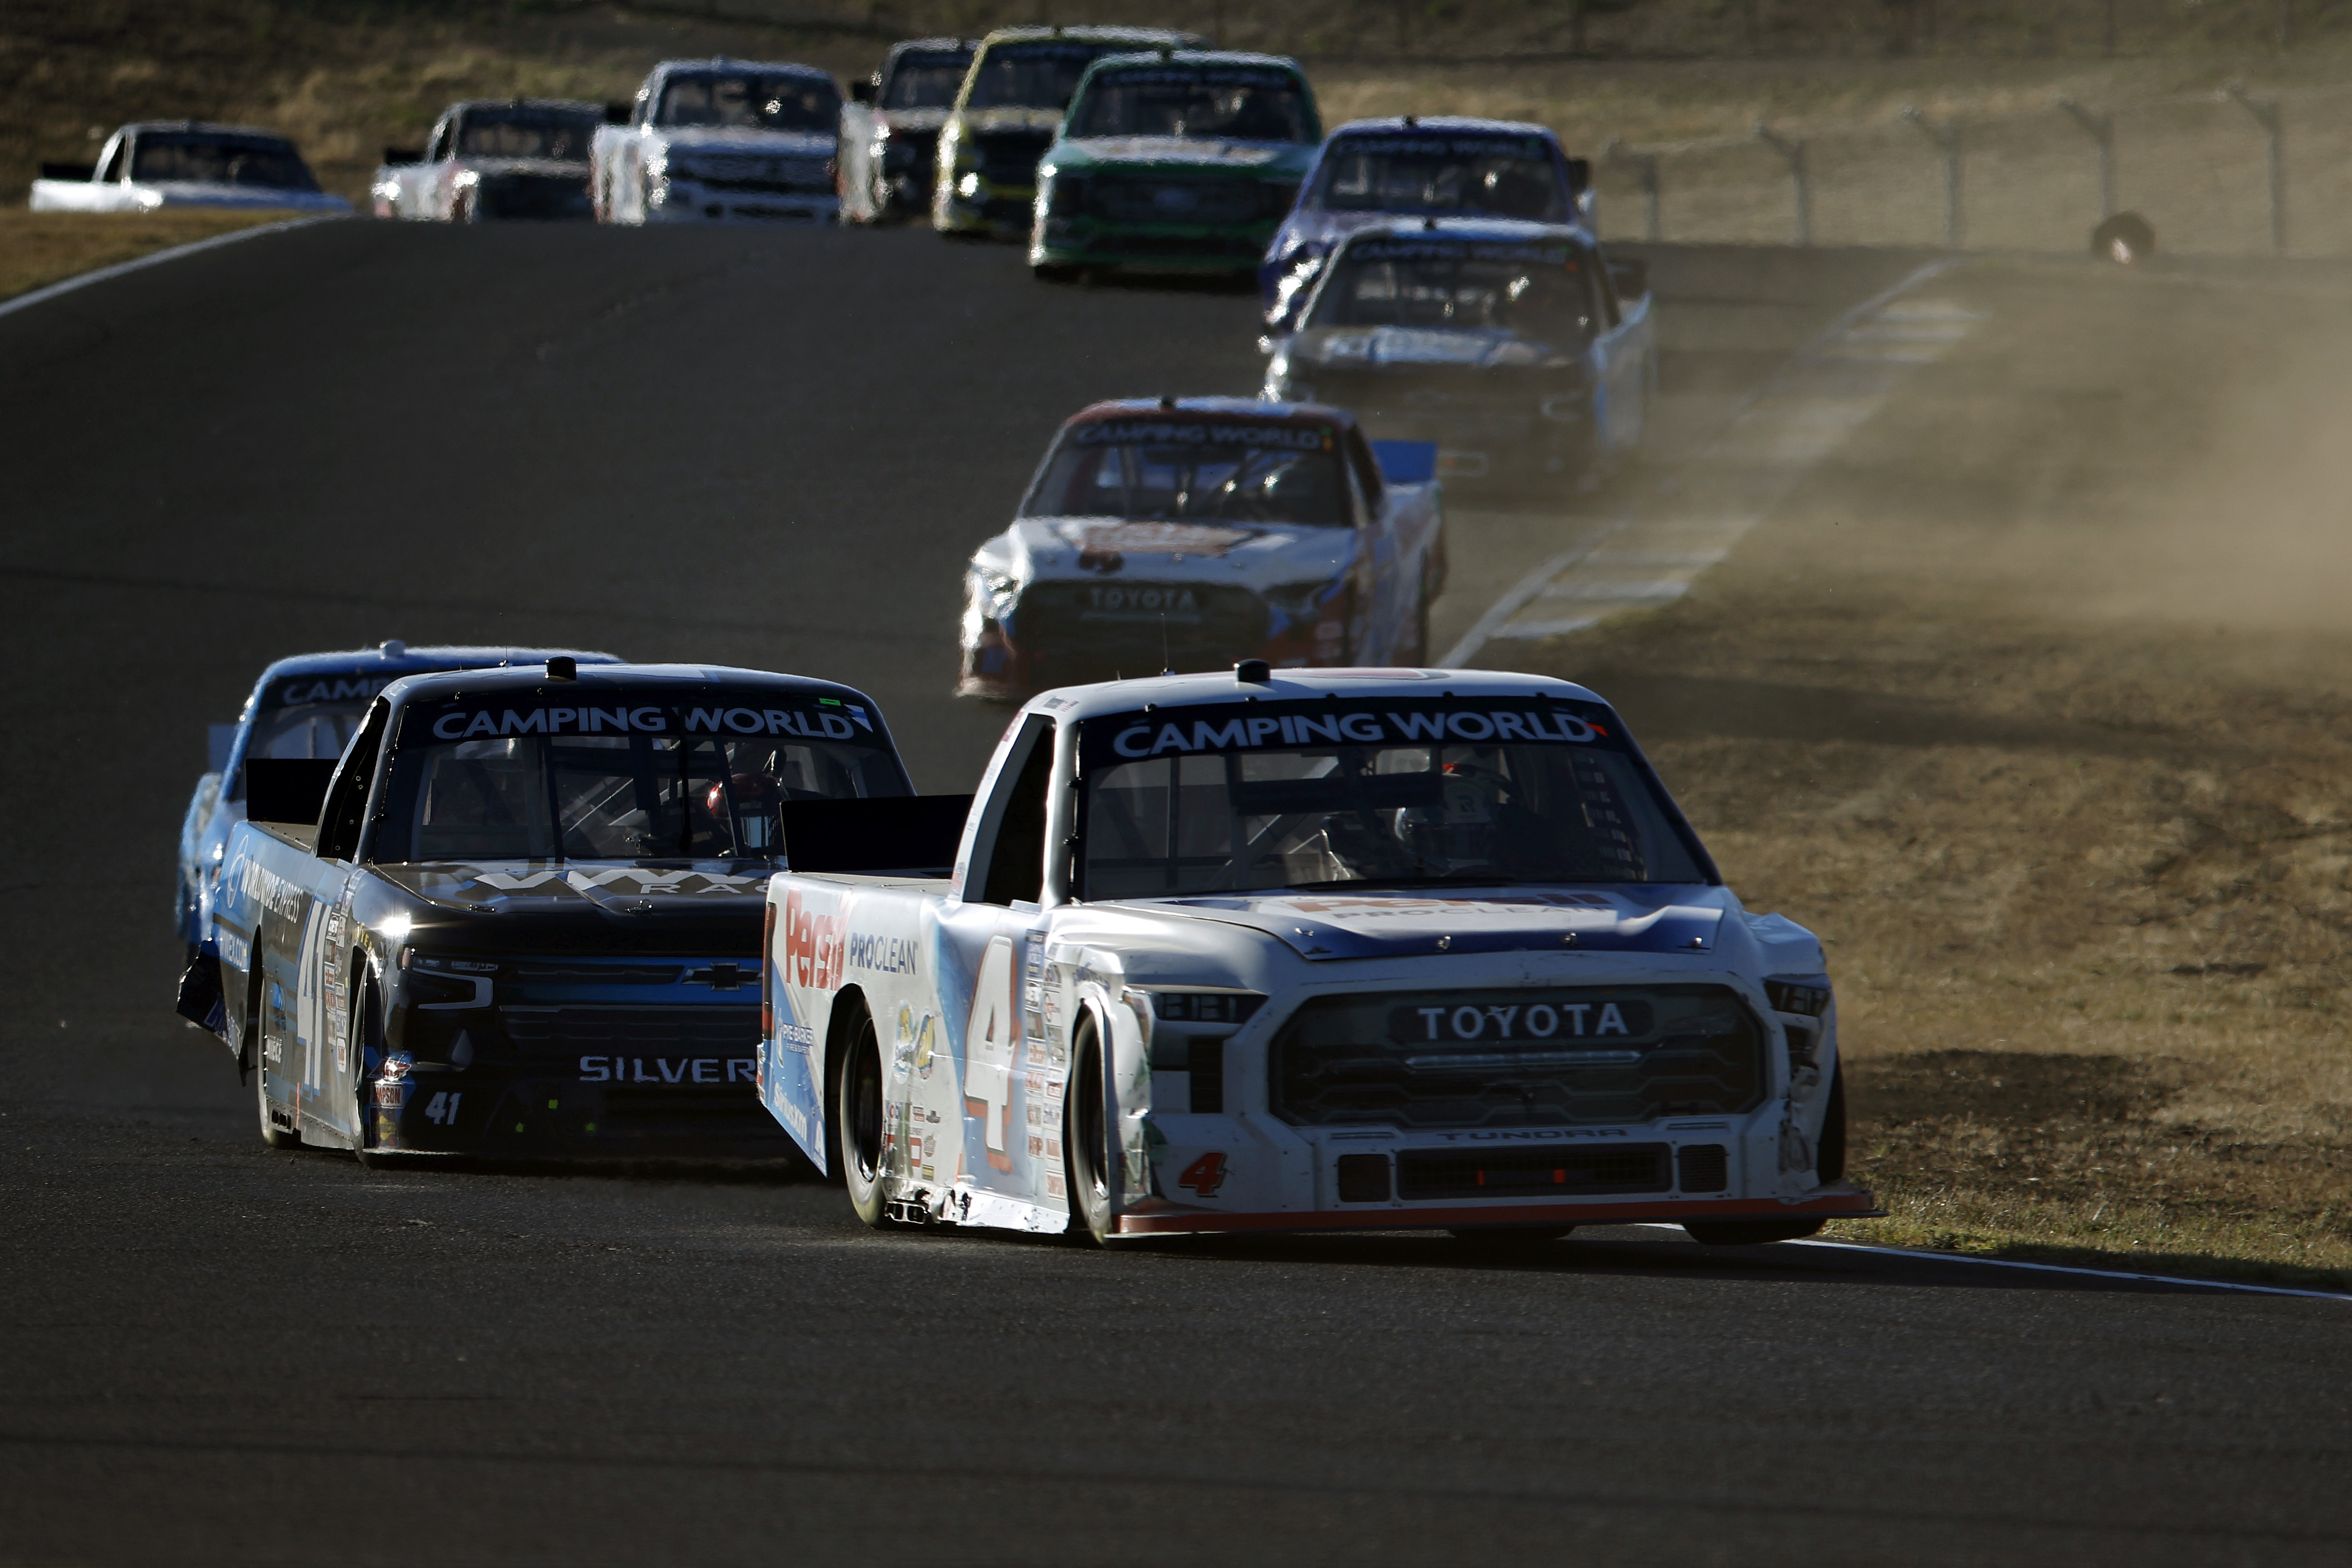 John Hunter Nemechek, driver of the #4 Persil Toyota, leads the field during the NASCAR Camping World Truck Series DoorDash 250 at Sonoma Raceway on June 11, 2022 in Sonoma, California.